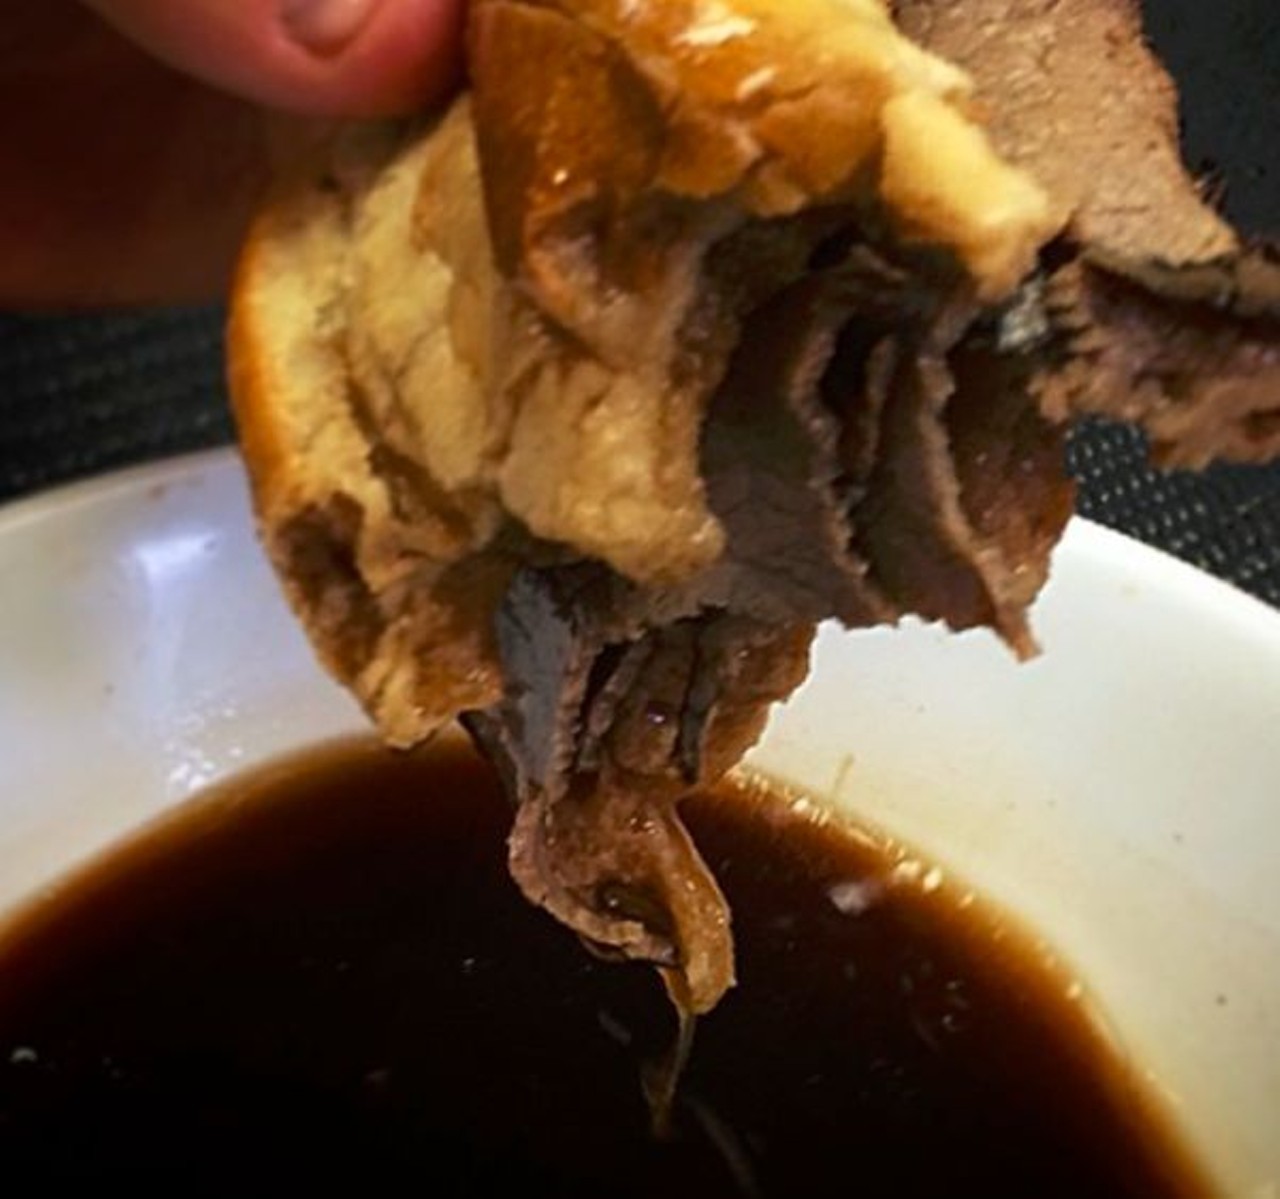  French Dip from Rosewood Grill
Multiple Locations
Call your sandwich the "Killer French Dip" and it damn well better be good. Oh, it is. A crusty French roll is stuffed with shaved Certified Angus Beef prime rib and Gruyere cheese. But it&#146;s that salty, beefy au jus on the side that transforms this sandwich into the stuff of legends.
Photo via @TheMiddletonLife/Instagram